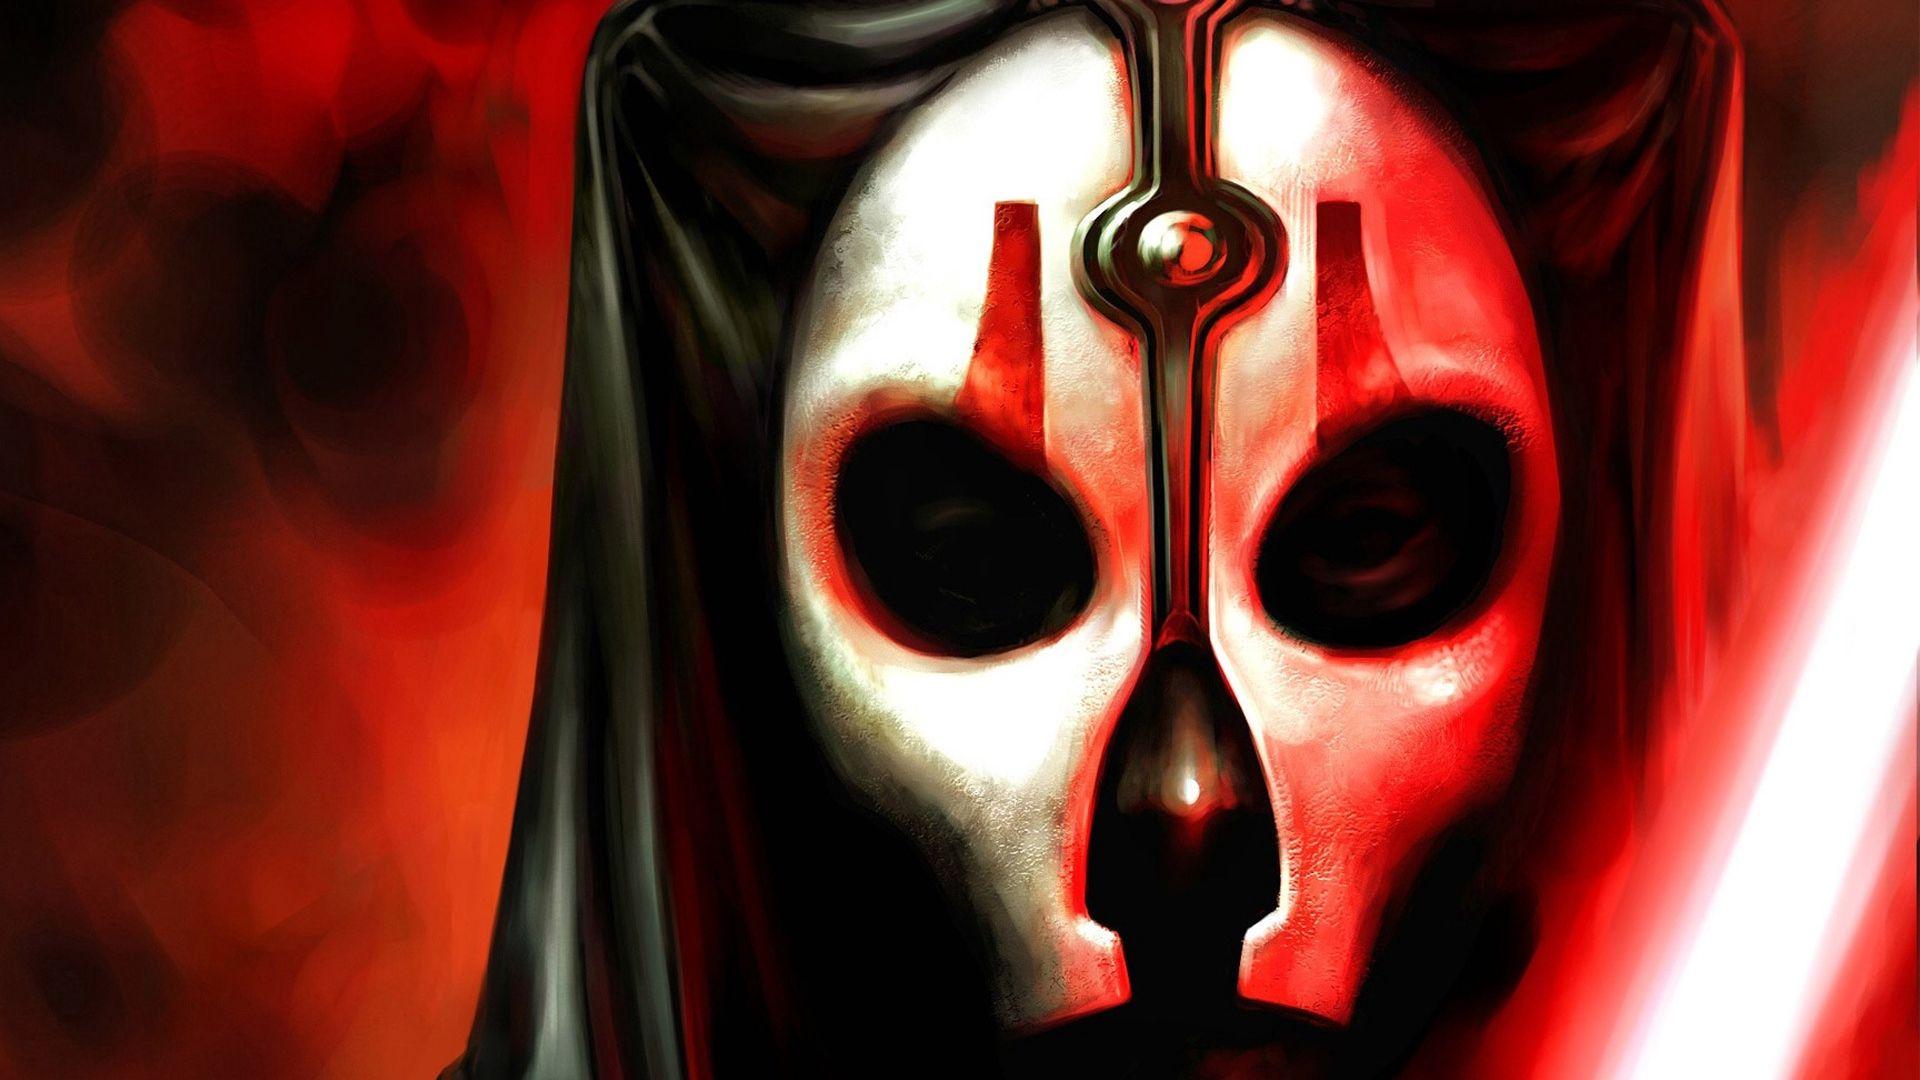 Download wallpaper 1920x1080 star wars, knights of the old republic